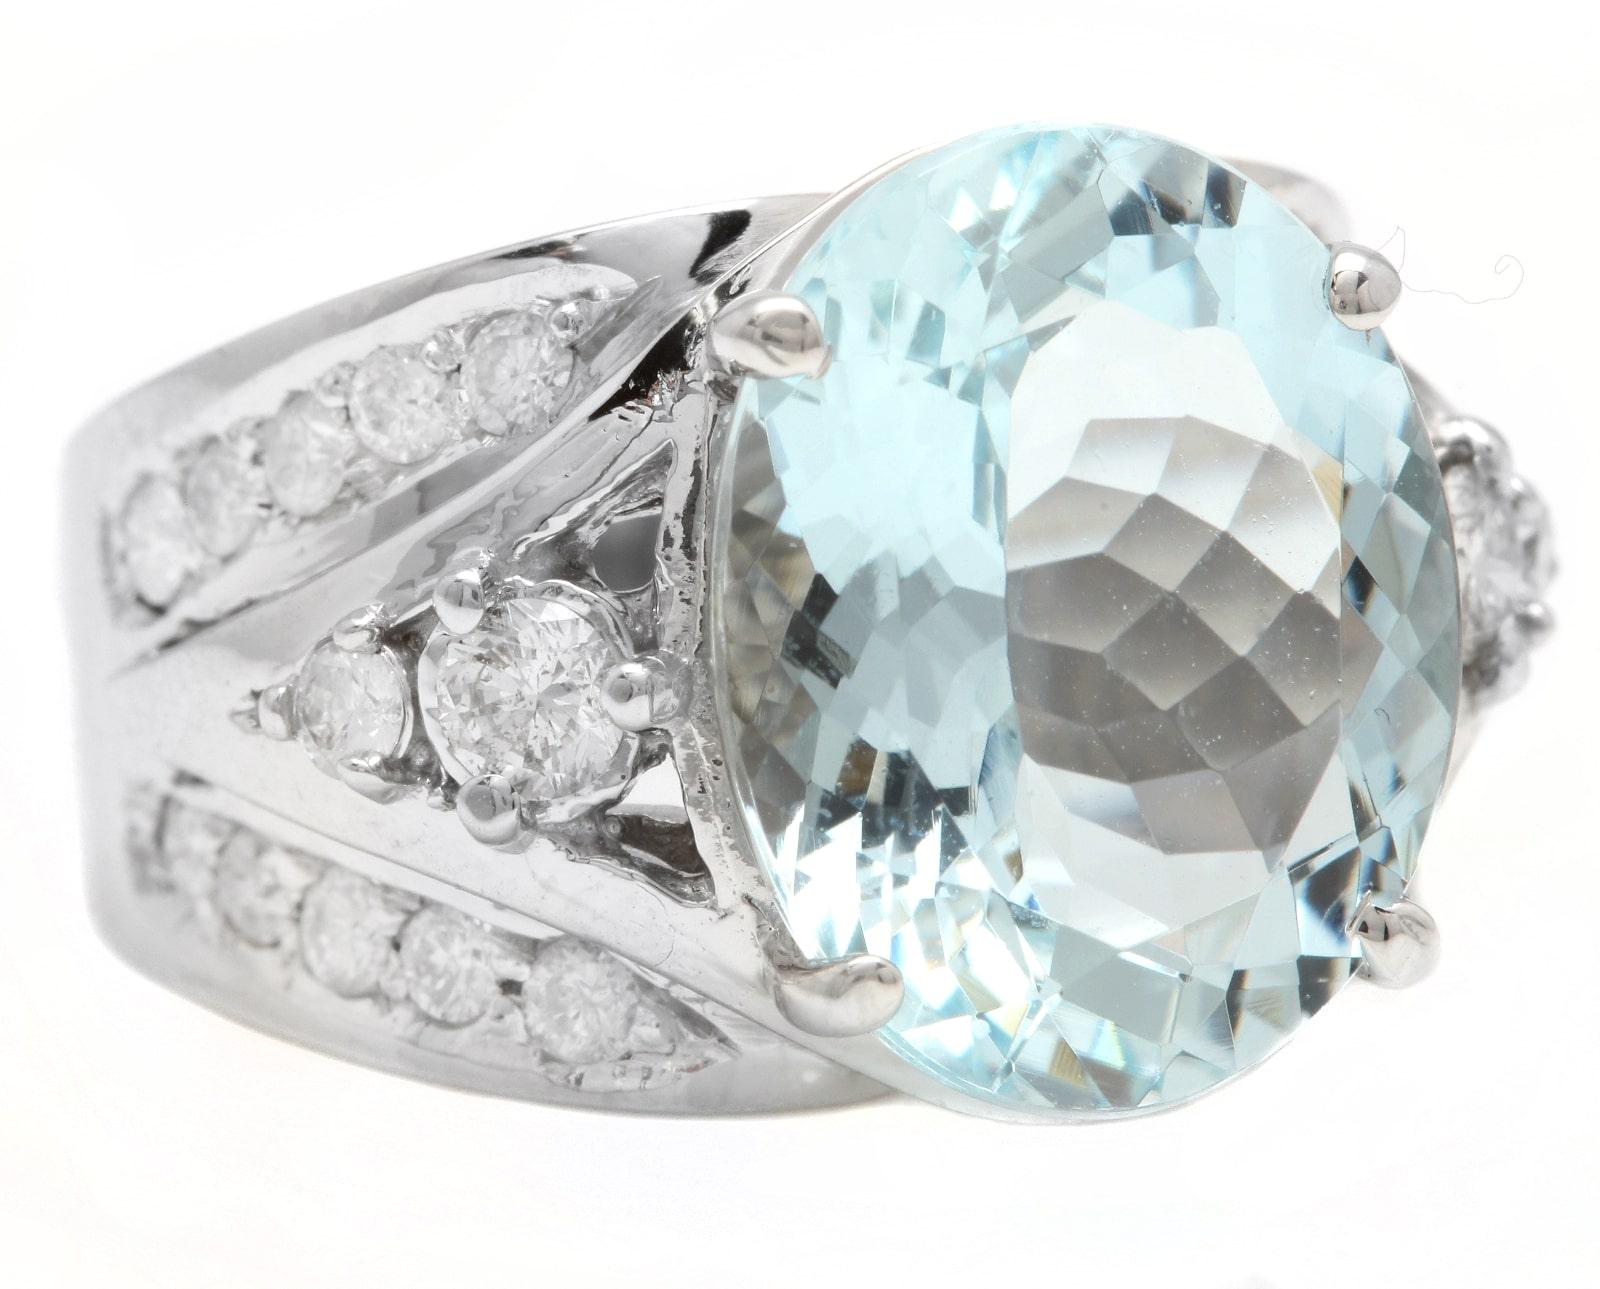 9.30 Carats Exquisite Natural Aquamarine and Diamond 14K Solid White Gold Ring

Suggested Replacement Value: 8,000.00

Total Natural Aquamarine Weight is: Approx. 8.00 Carats 

Aquamarine Measures: Approx. 14.00 x 12.00mm

Natural Round Diamonds